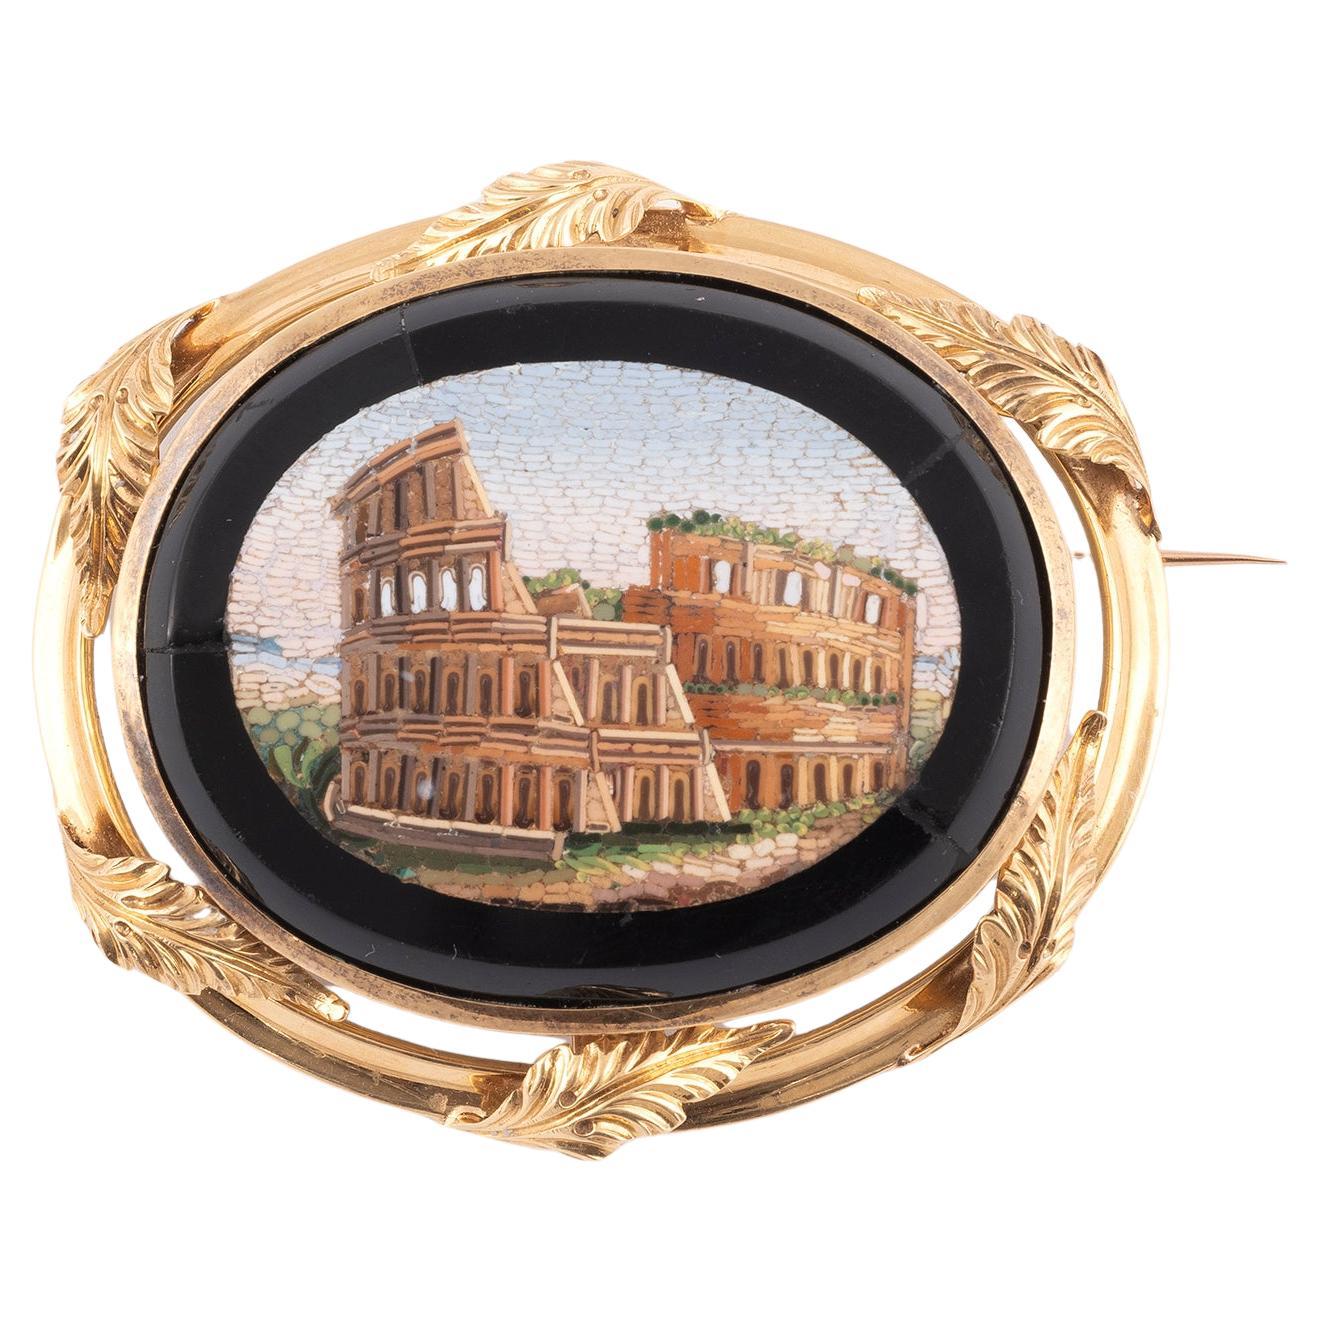 Comprising a bracelet with five oval micromosaics depicting Roman ruins framed by a plain motif and joined by links, 21.3 cm; 